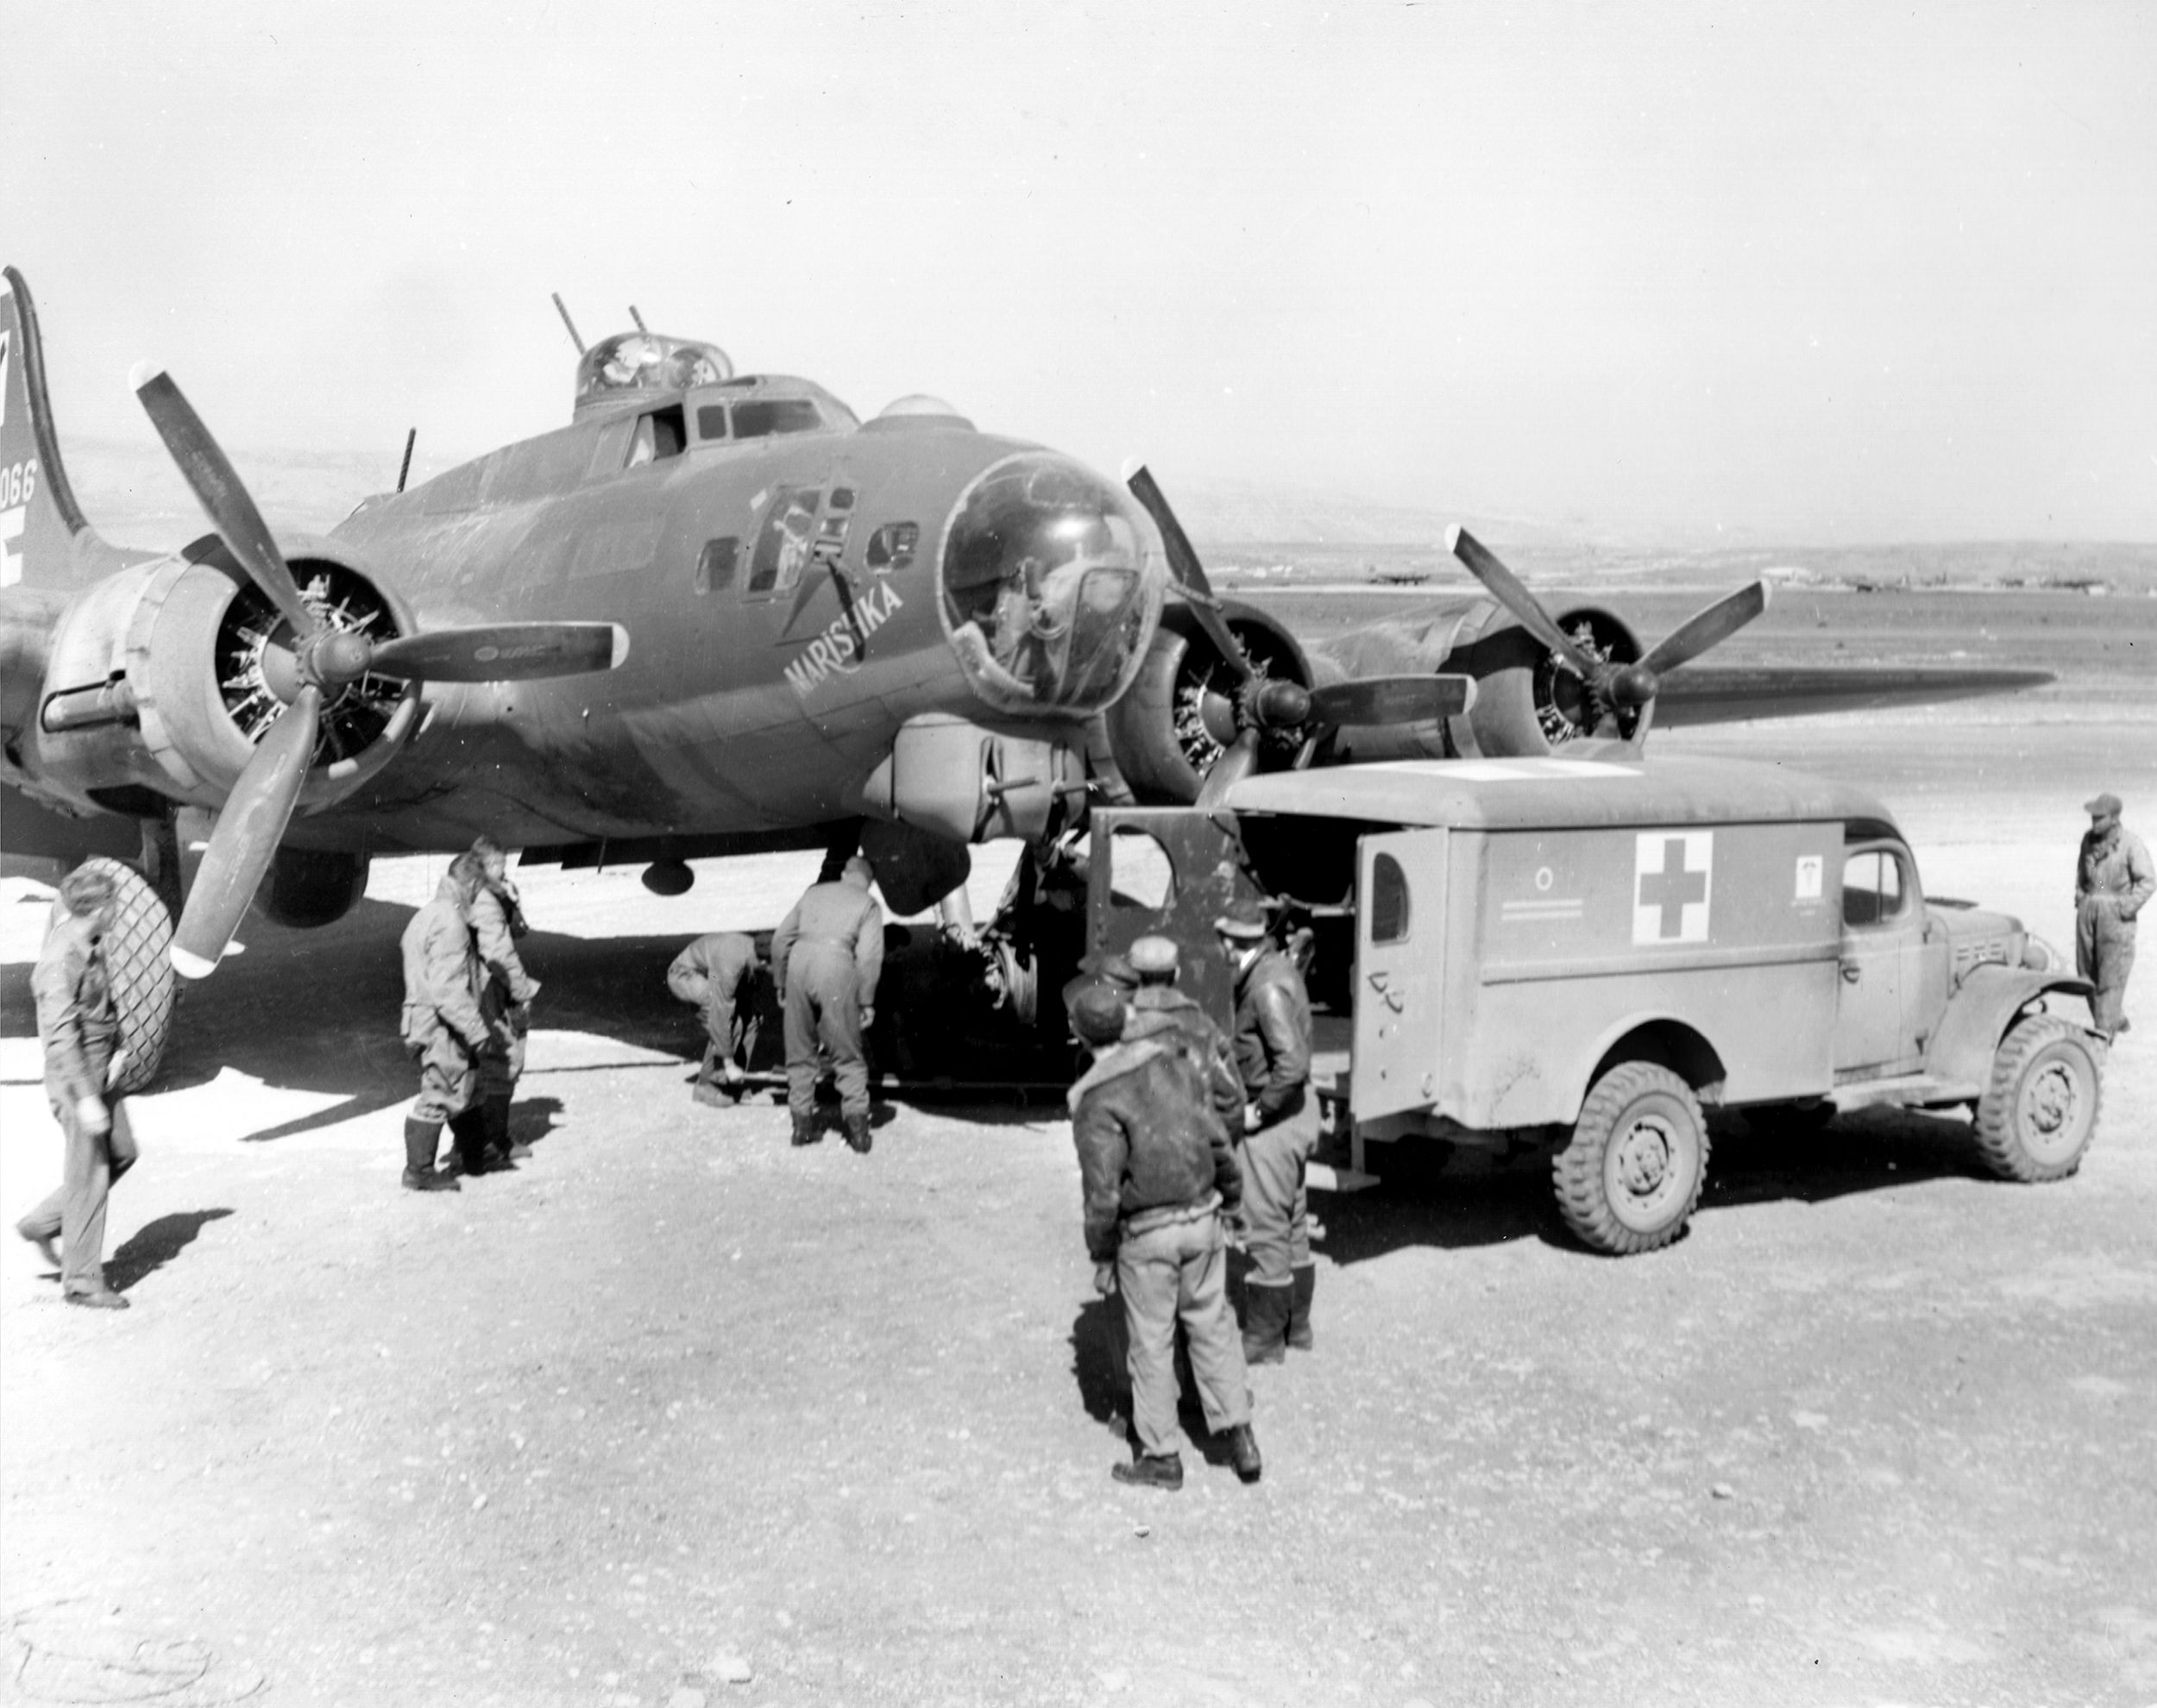 At Amendola Field a stretcher crew (under fuselage) works to remove a casualty from a 97th Bomb Group B-17 “Marishka” after it returned from a combat mission. Tucker noted that after each mission a medic offered crews a shot of whiskey to help them through post-raid debriefings.